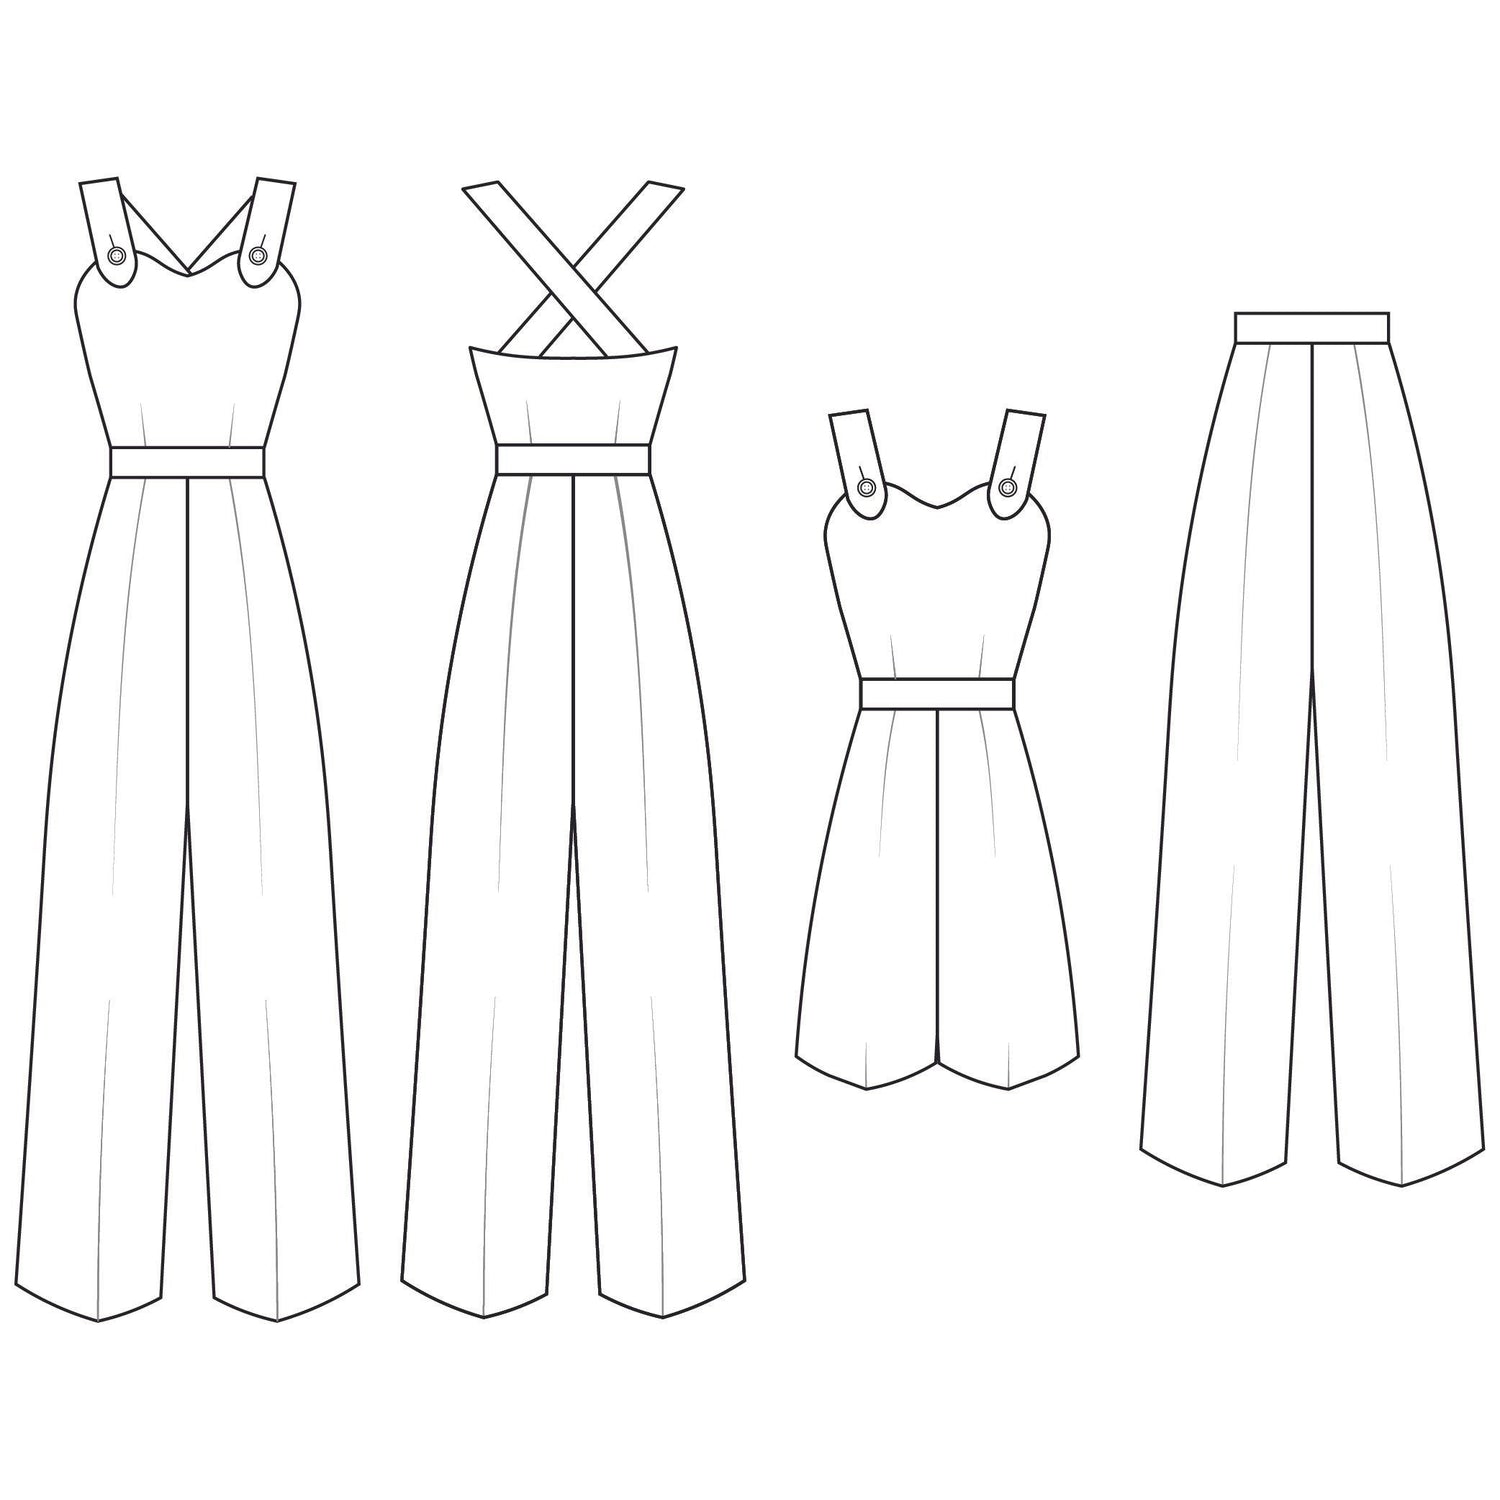 Line drawing of front a back of overalls, plus front of playsuit and slacks.